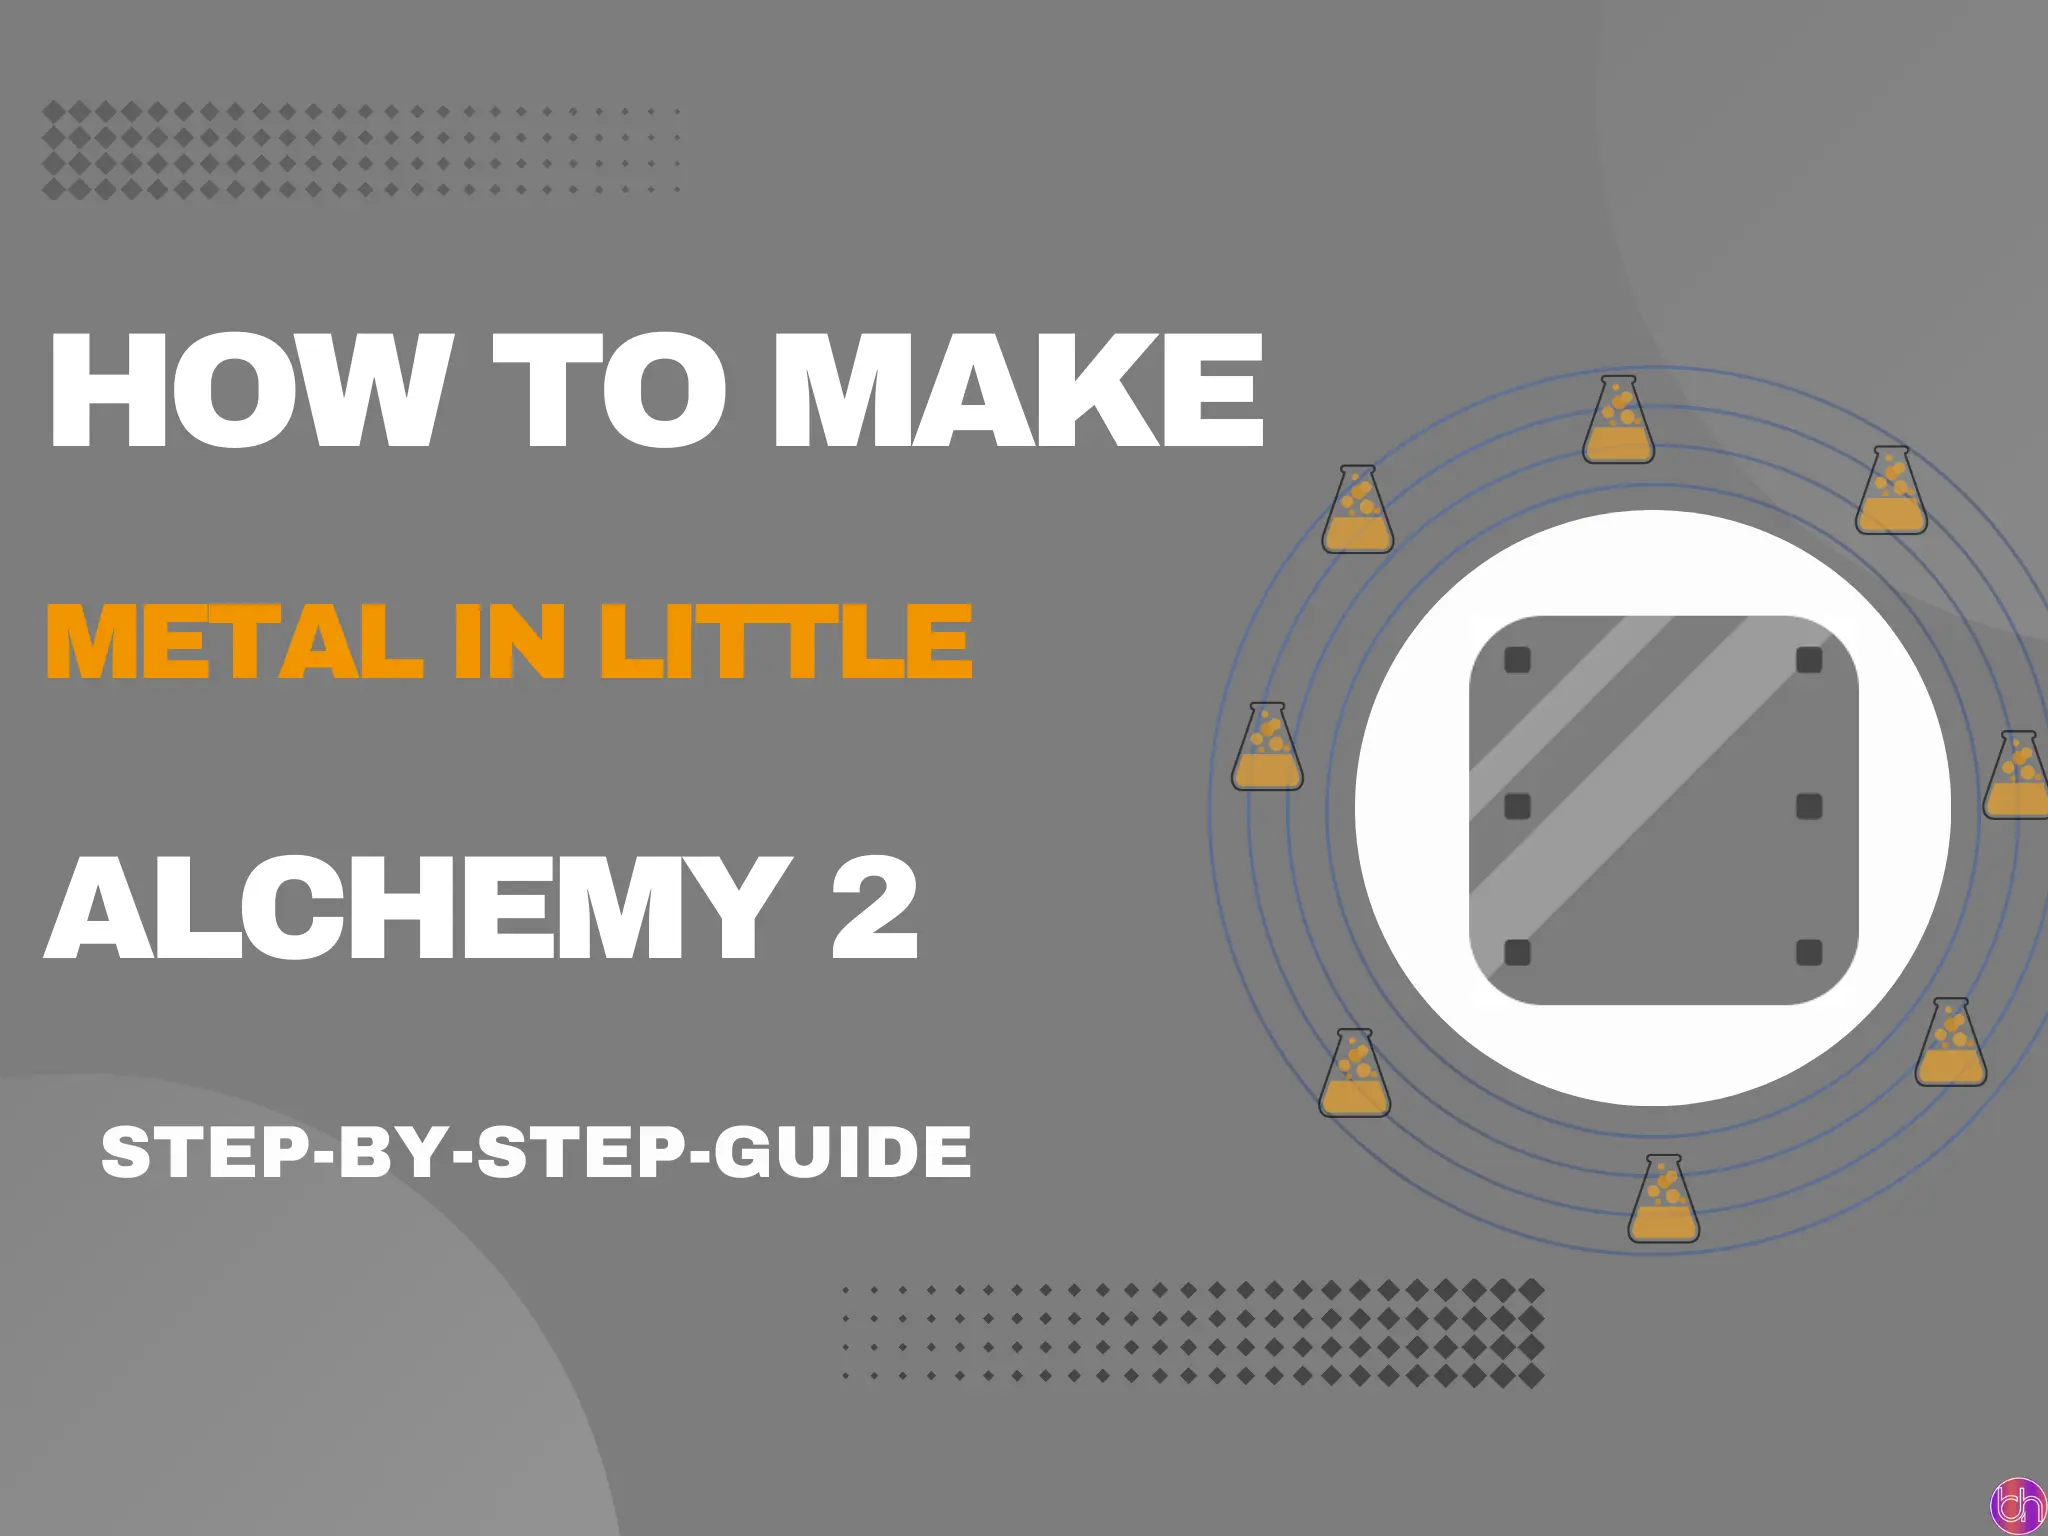 How to make Metal in little alchemy 2